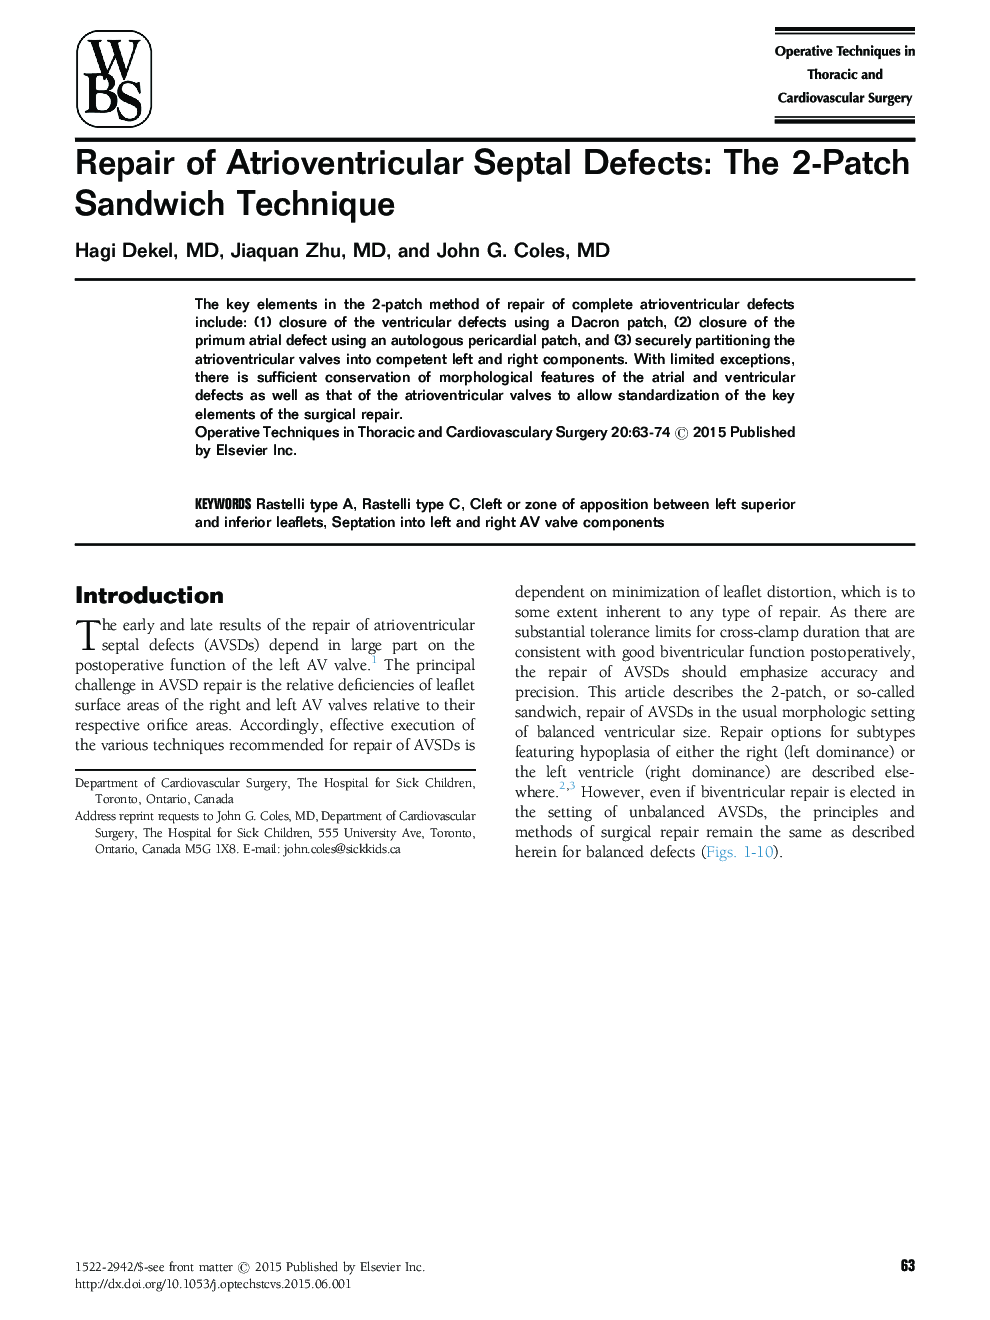 Repair of Atrioventricular Septal Defects: The 2-Patch Sandwich Technique